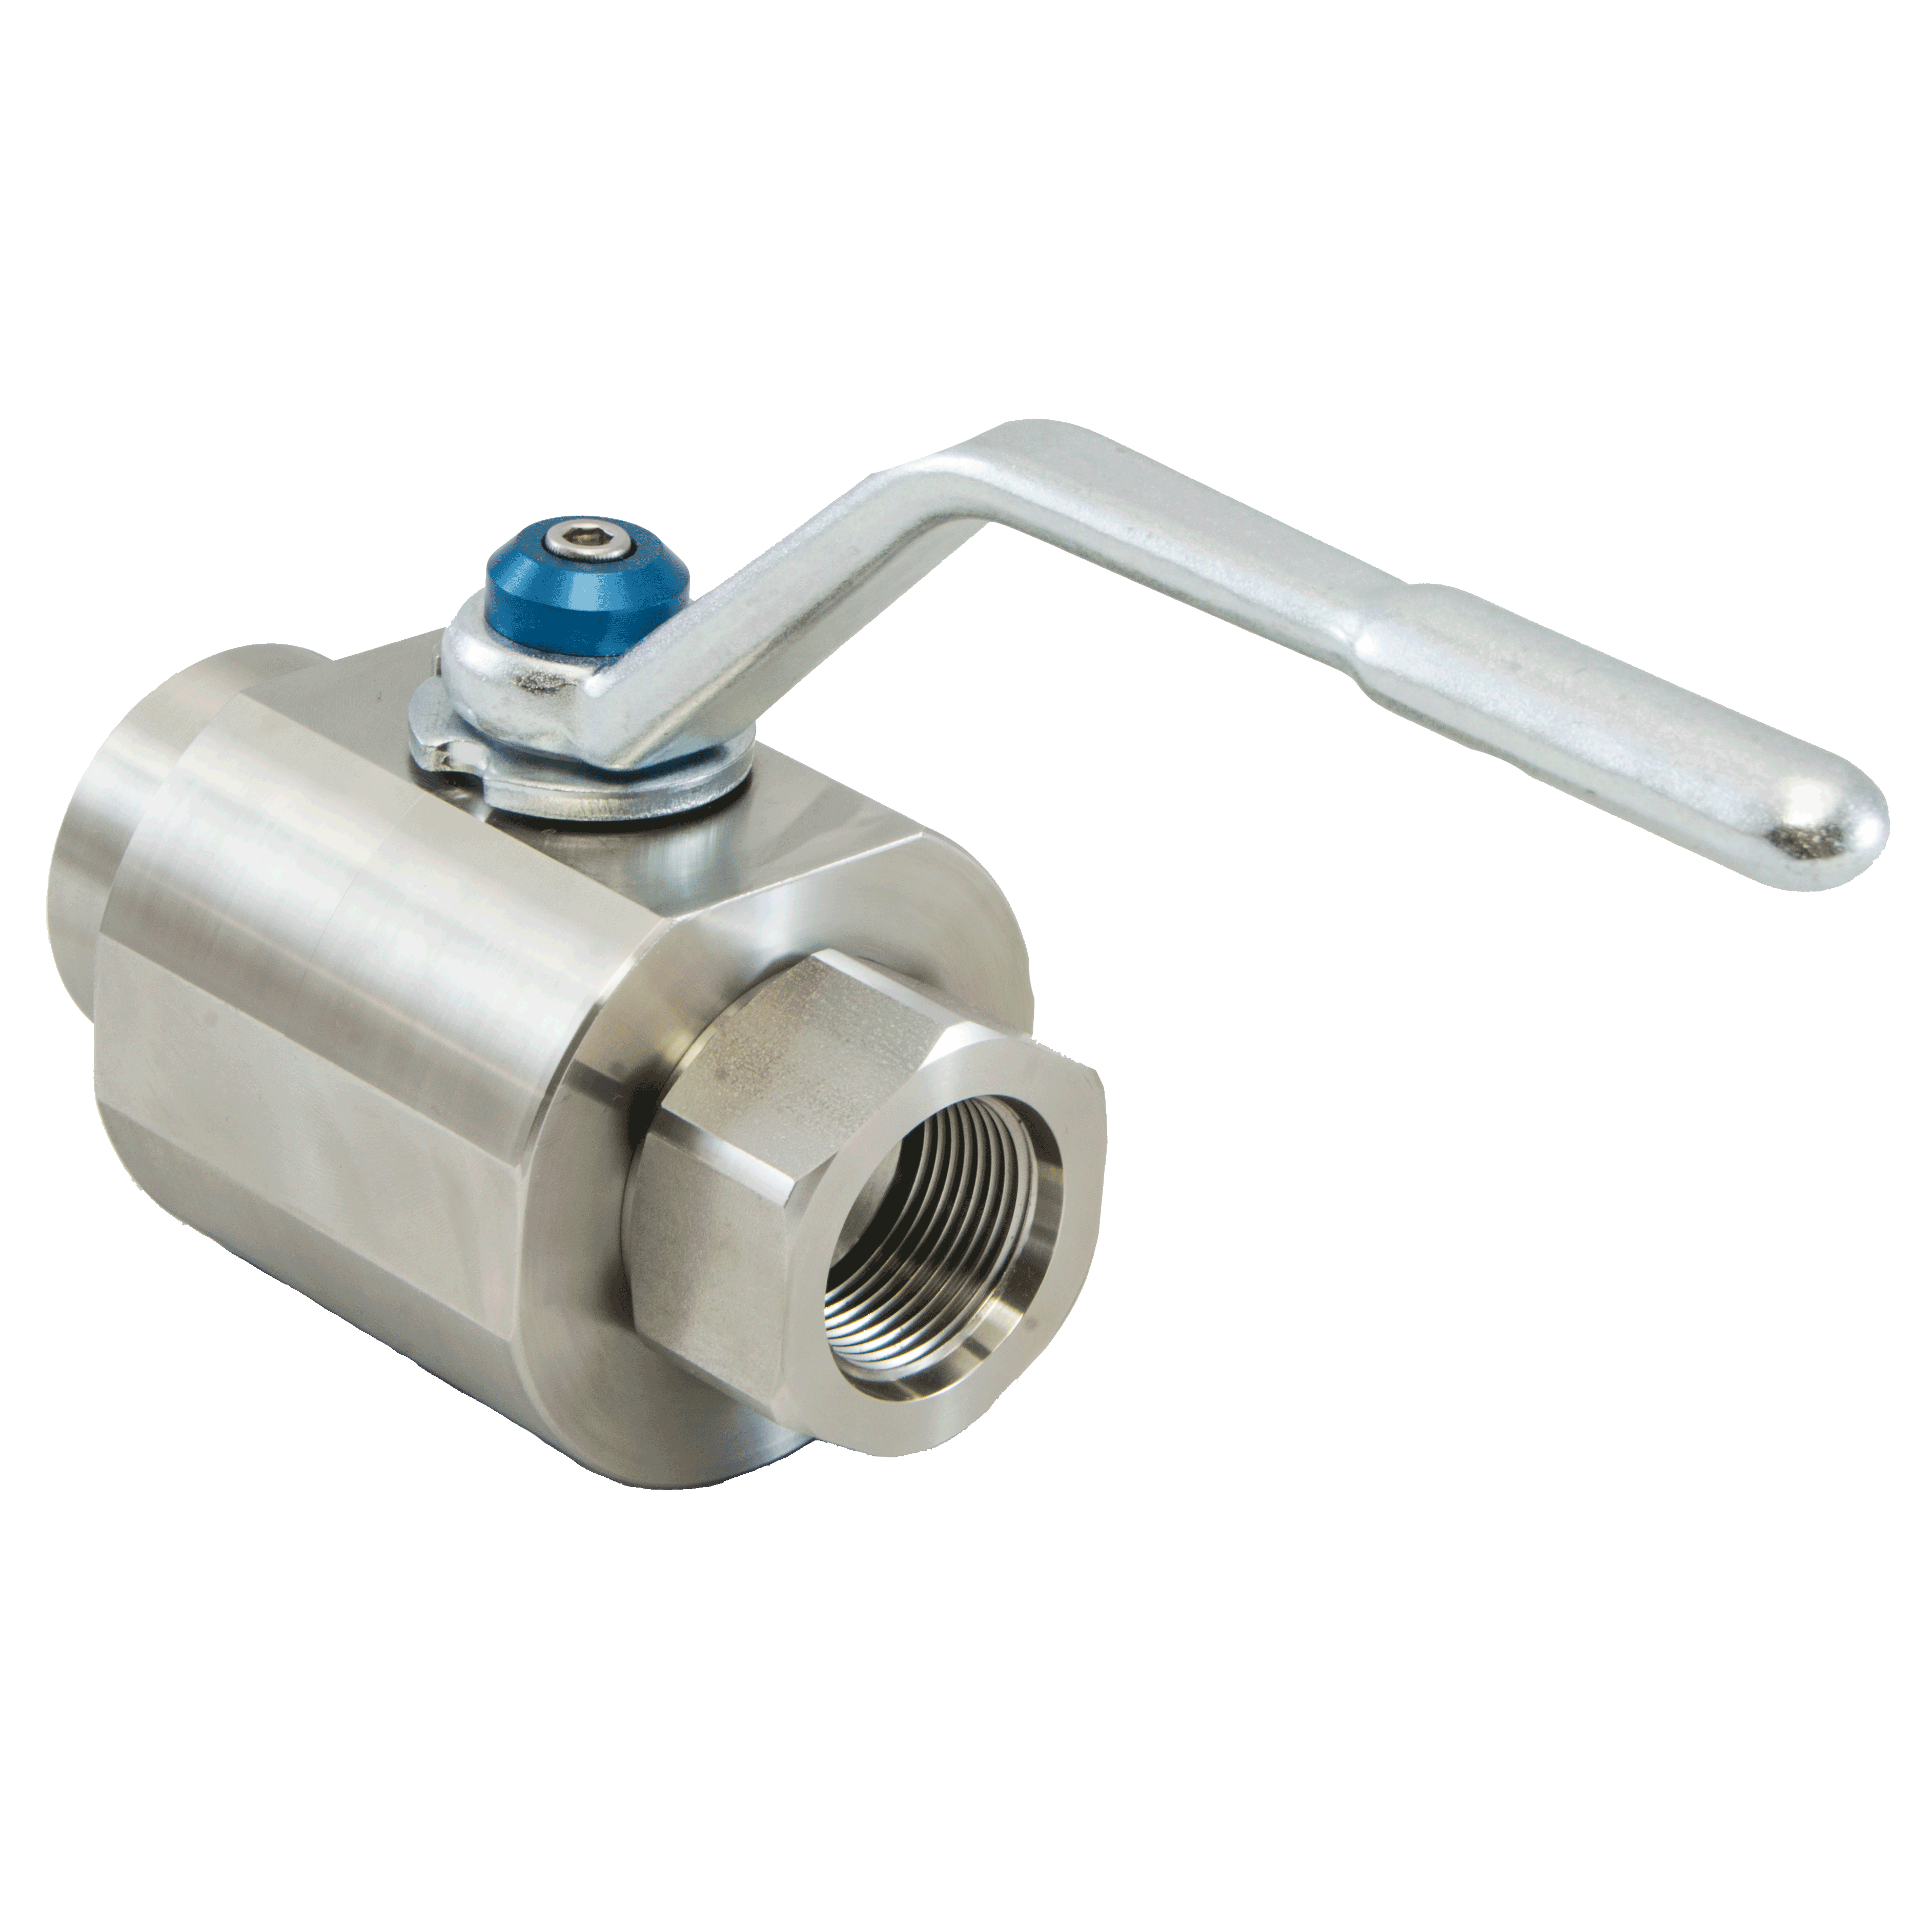 BVHS-1000N-2213 : DMIC Stainless Round Body Ball Valve, 1 NPT, 316 Stainless Steel, 6000psi, Two-Way